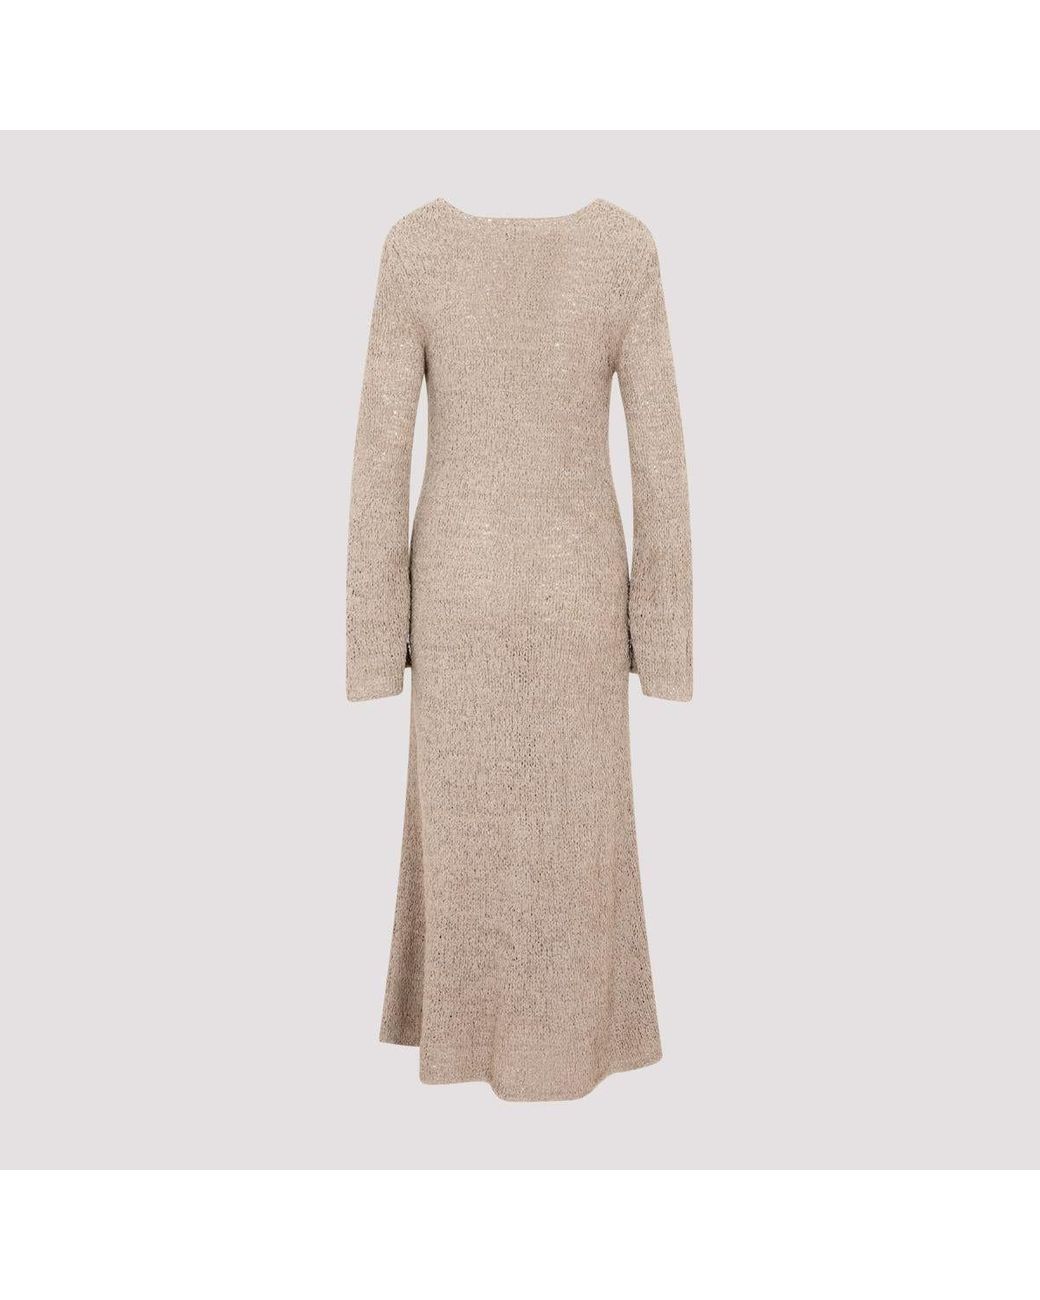 By Malene Birger Paige Dress in Natural | Lyst